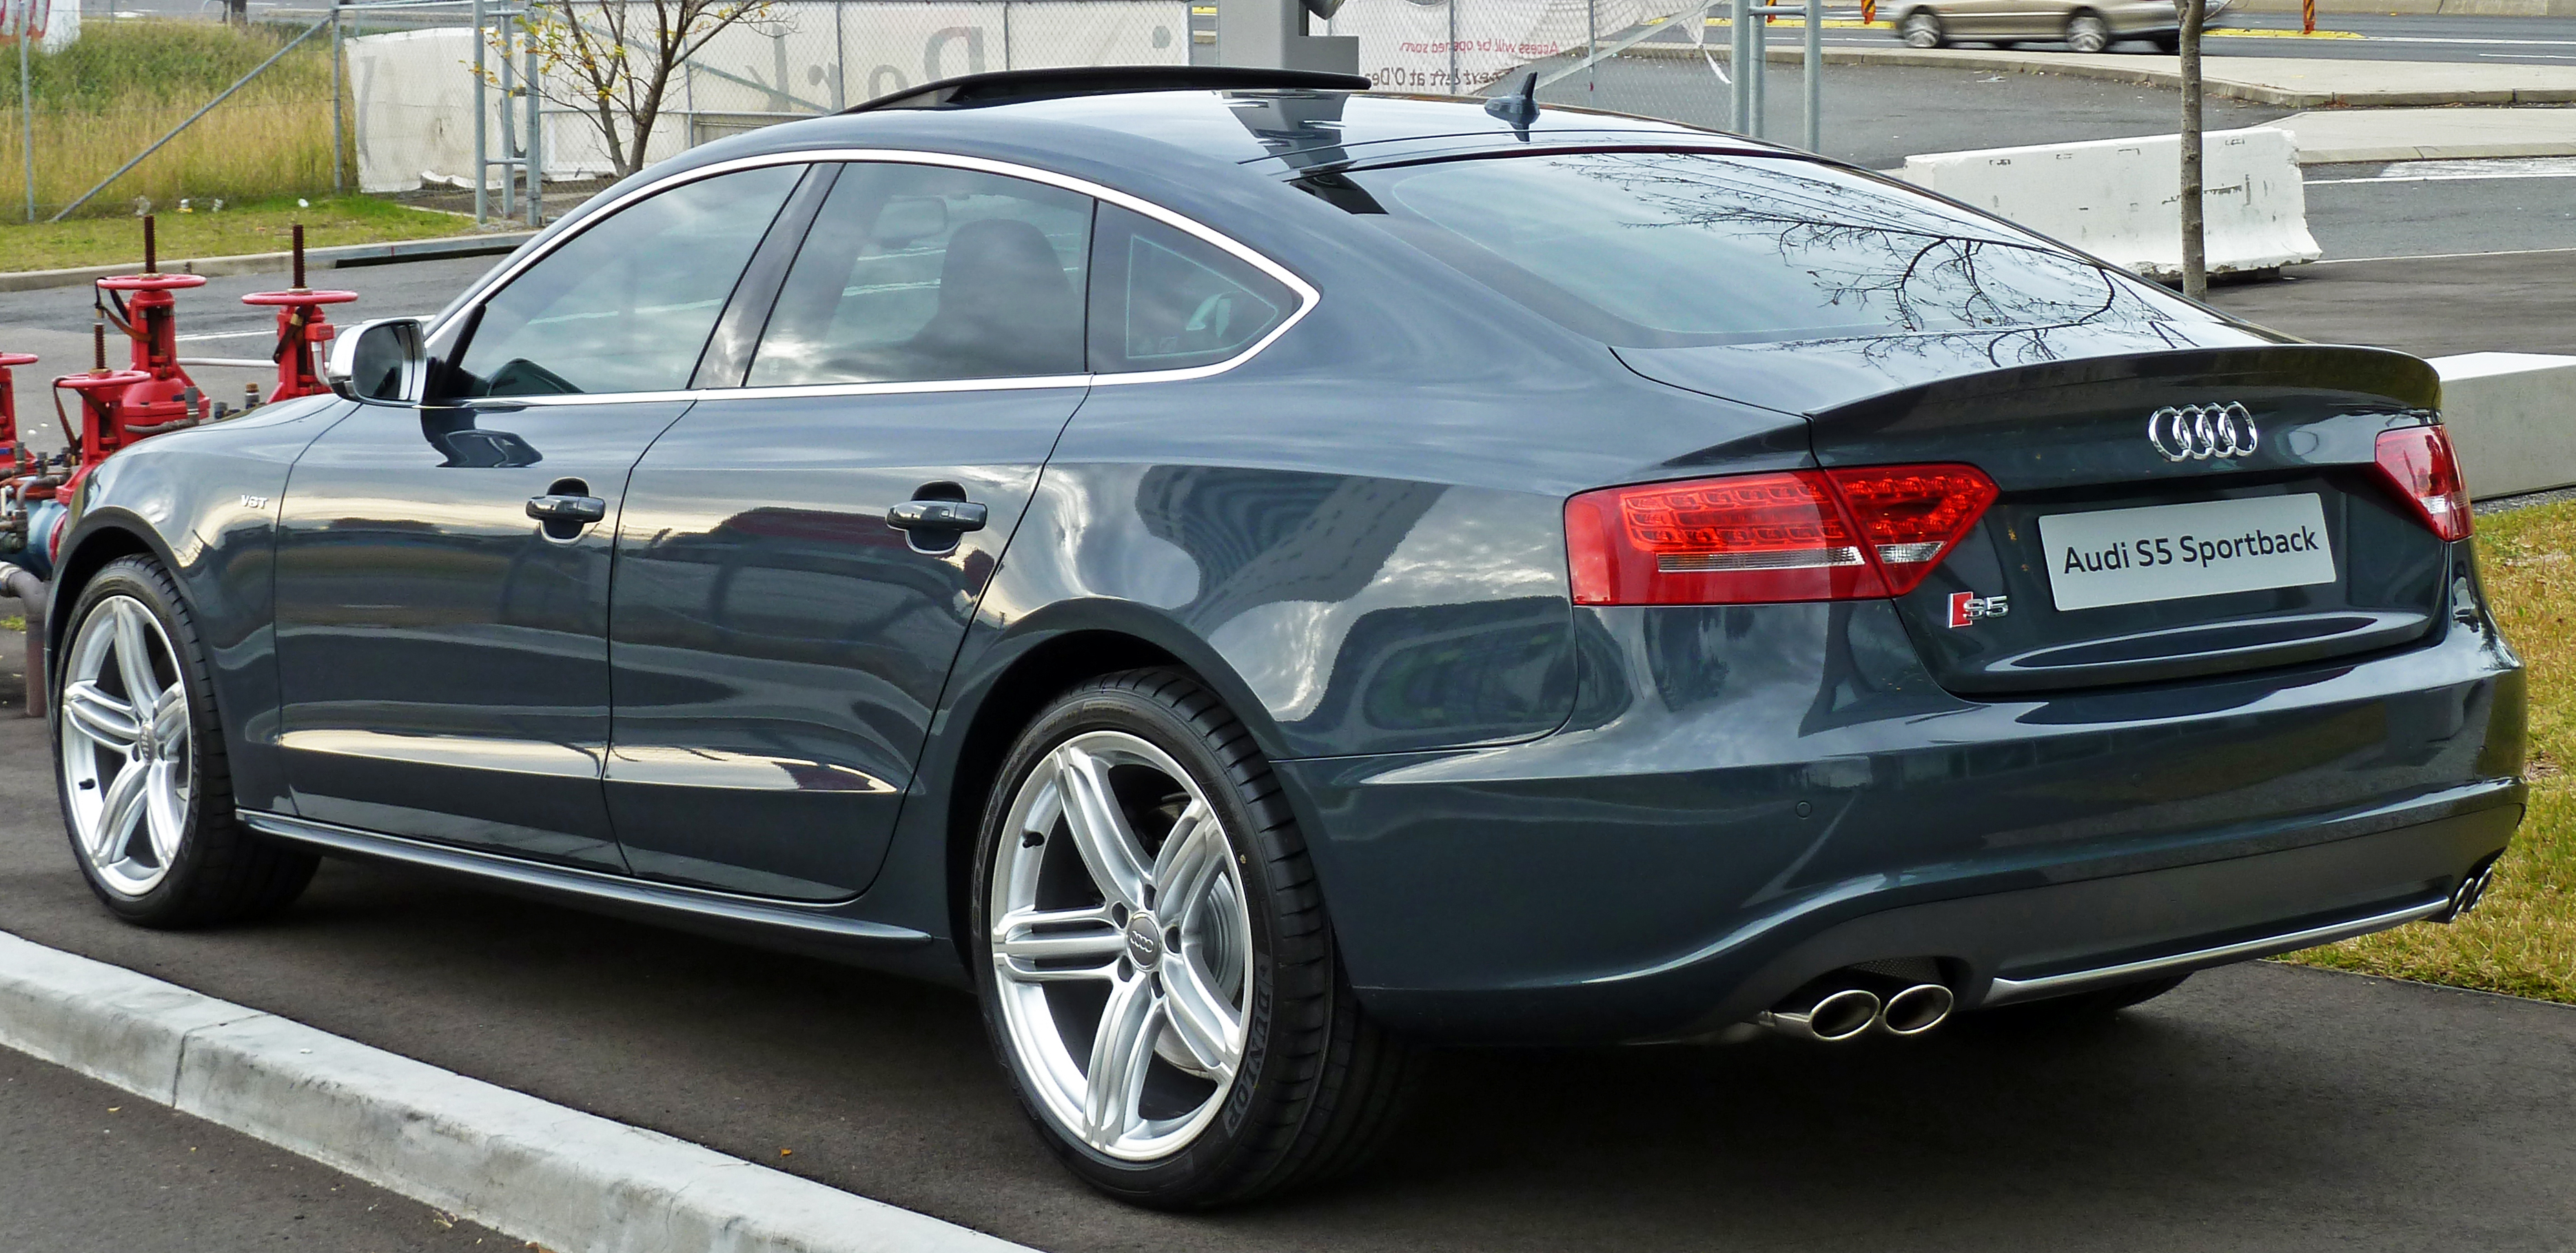 Nice wallpapers Audi S5 3738x1818px